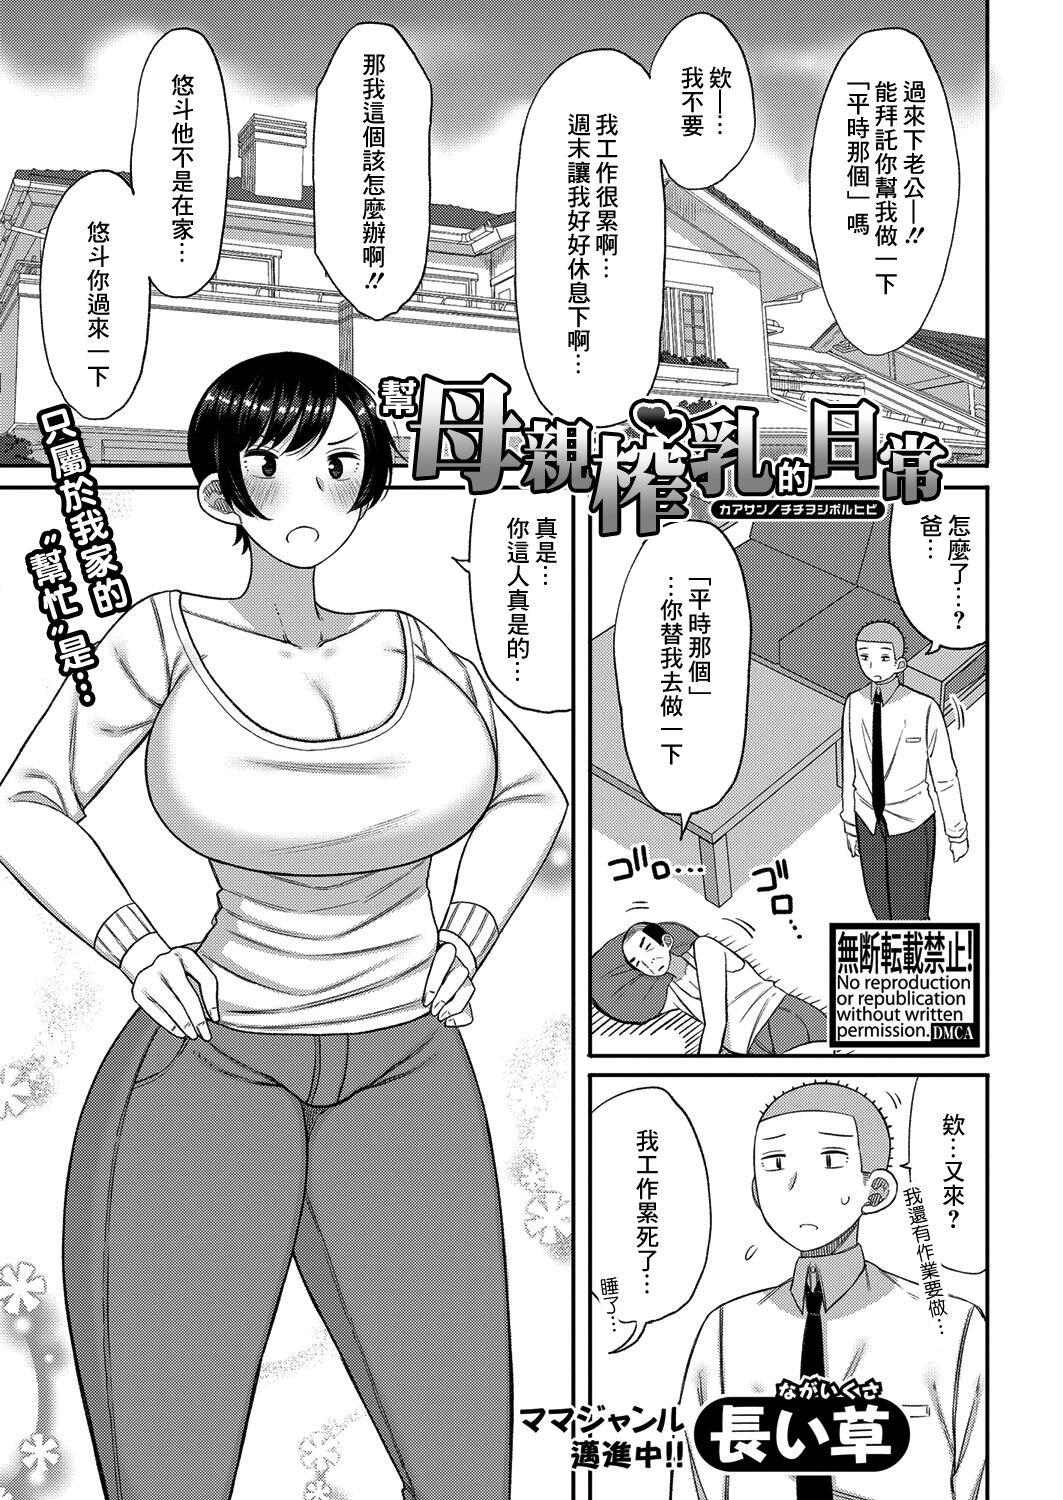 Babes 母さんの乳を榨る日々 Tan - Page 1